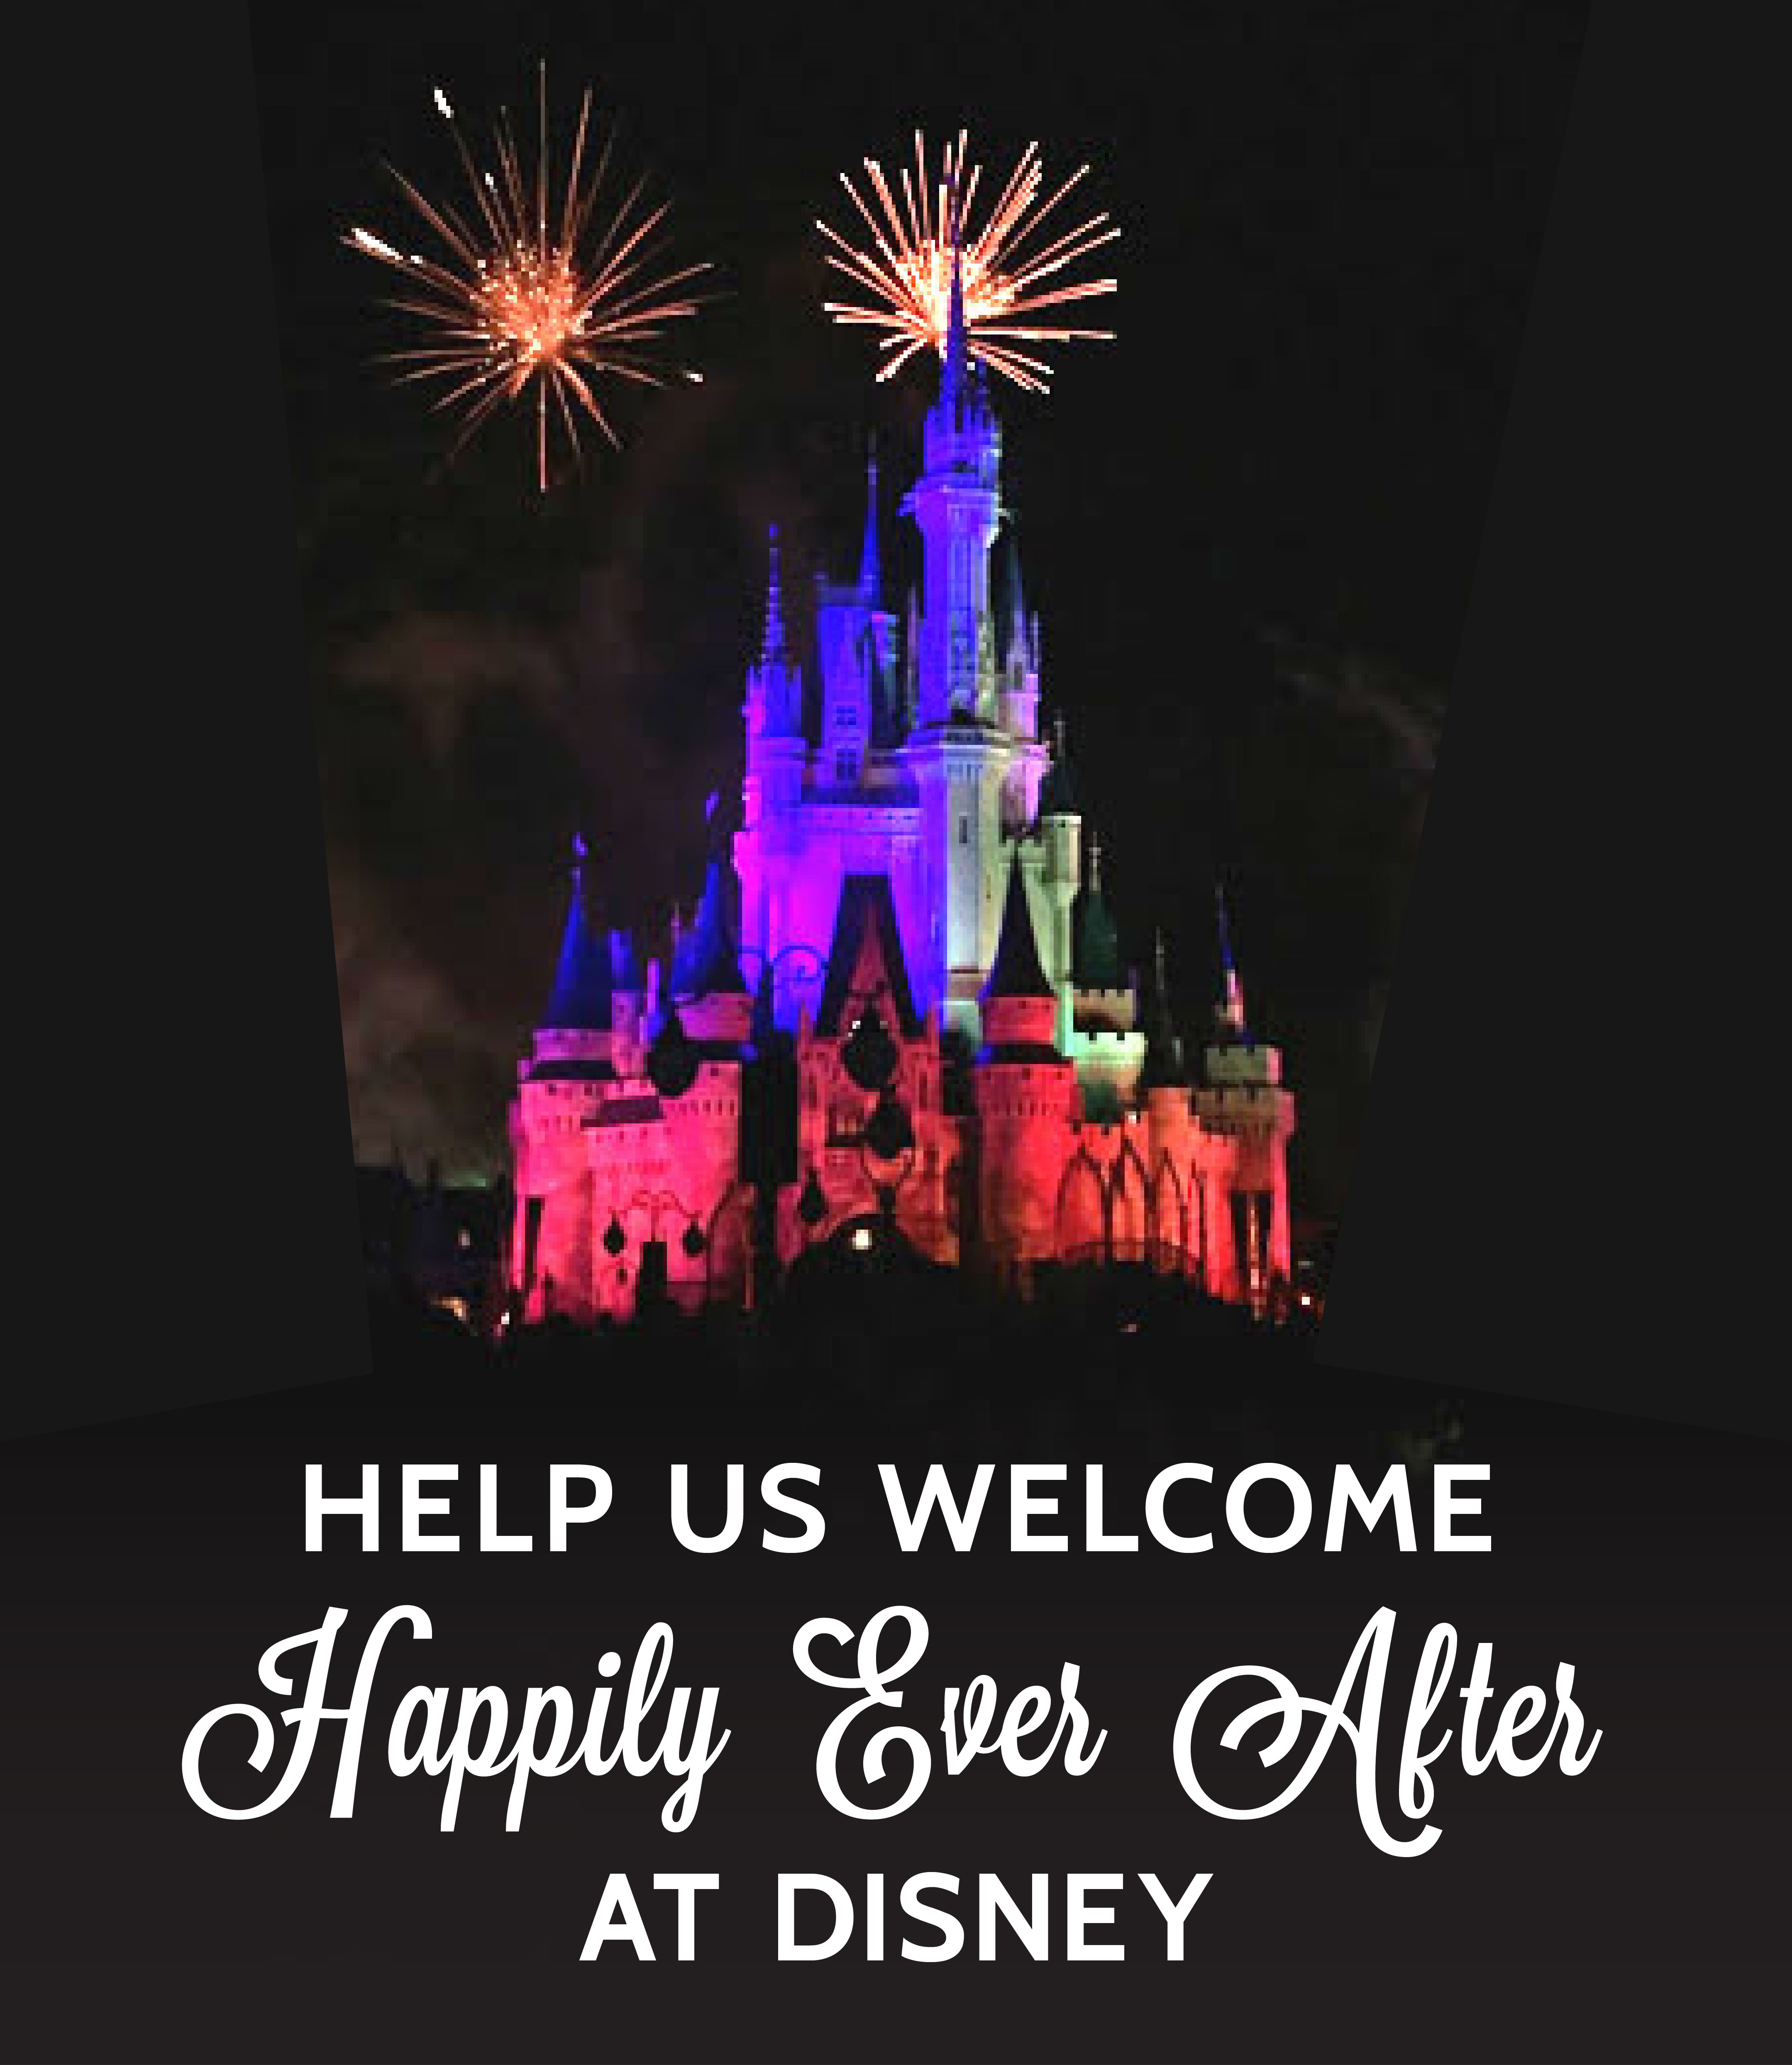 Happily Ever Fire works